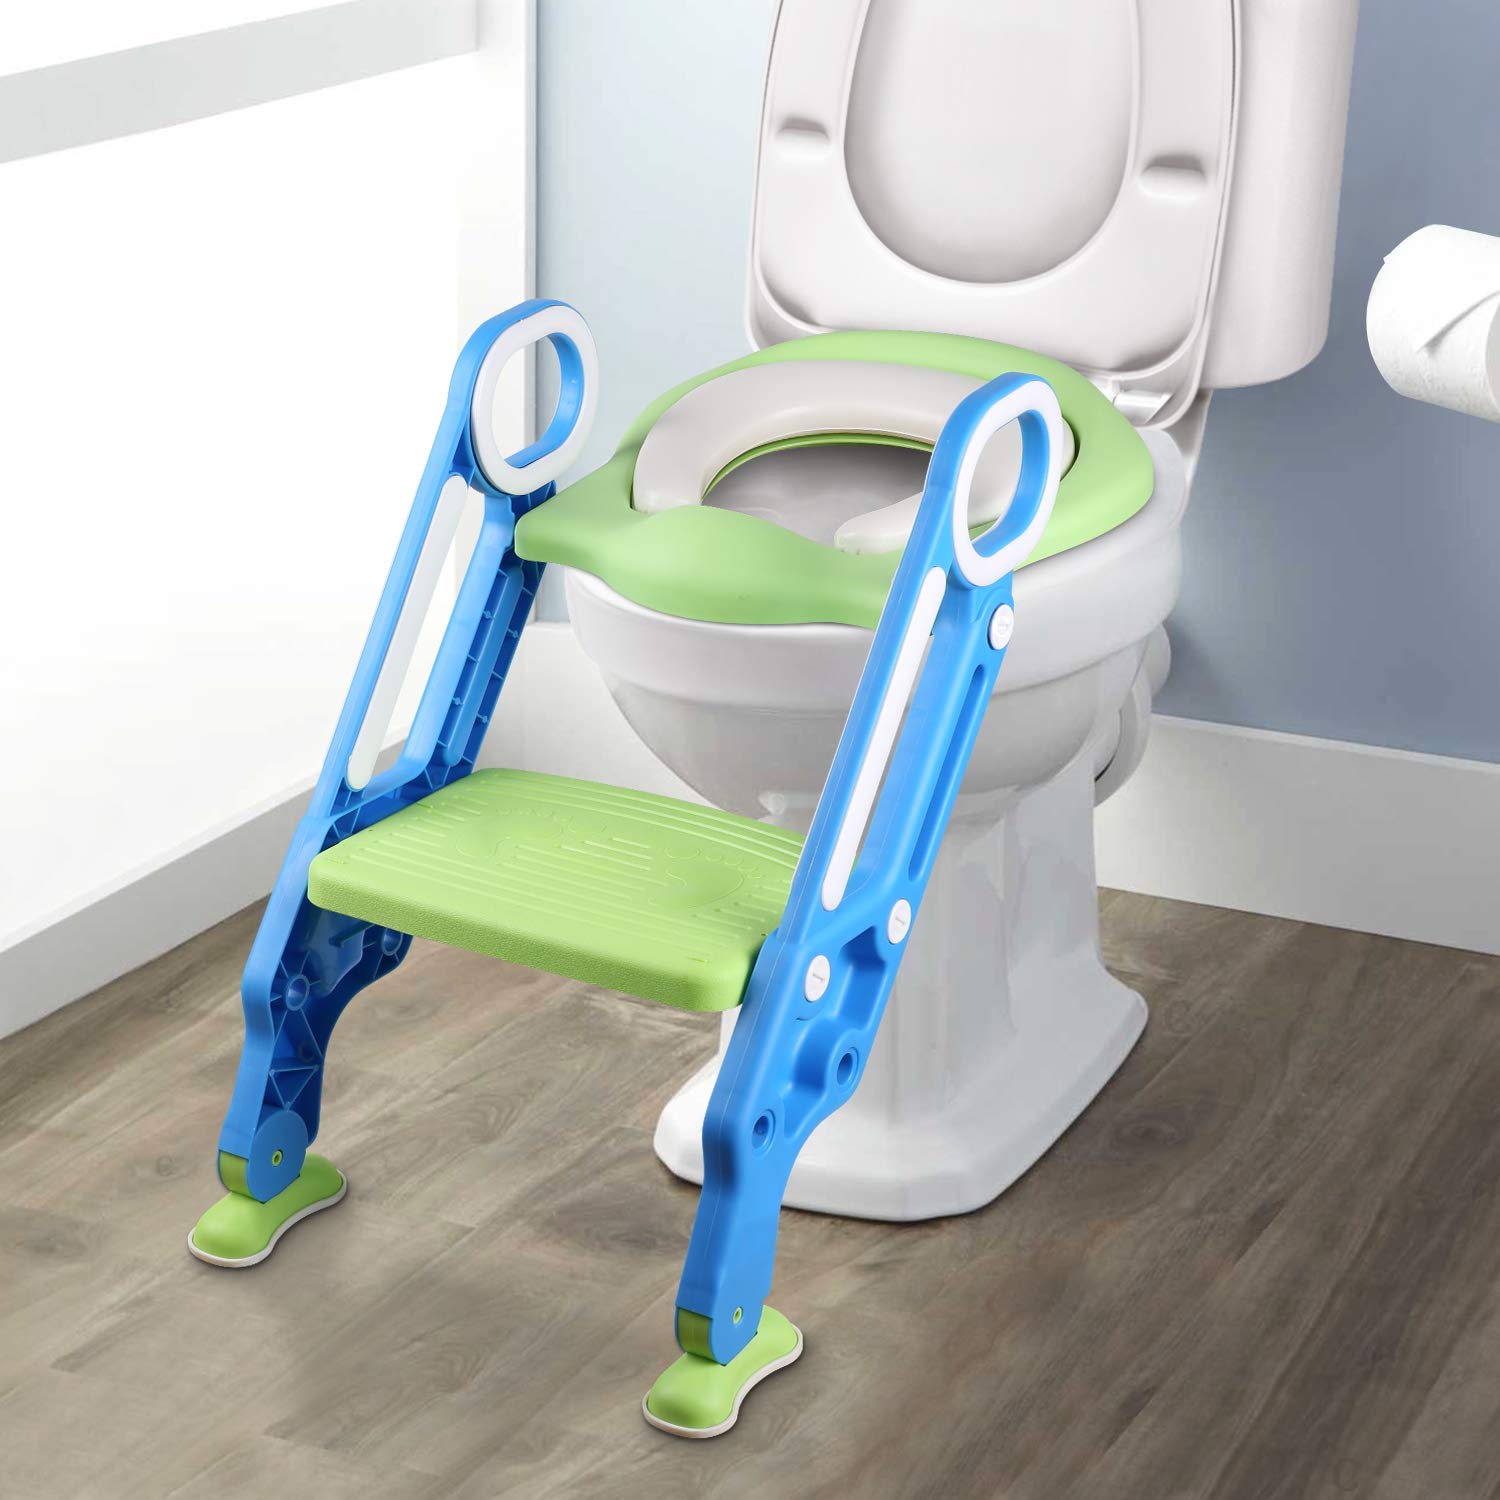 Yissvic Potty Training Toilet Seat With Step Stool Ladder For Kids And